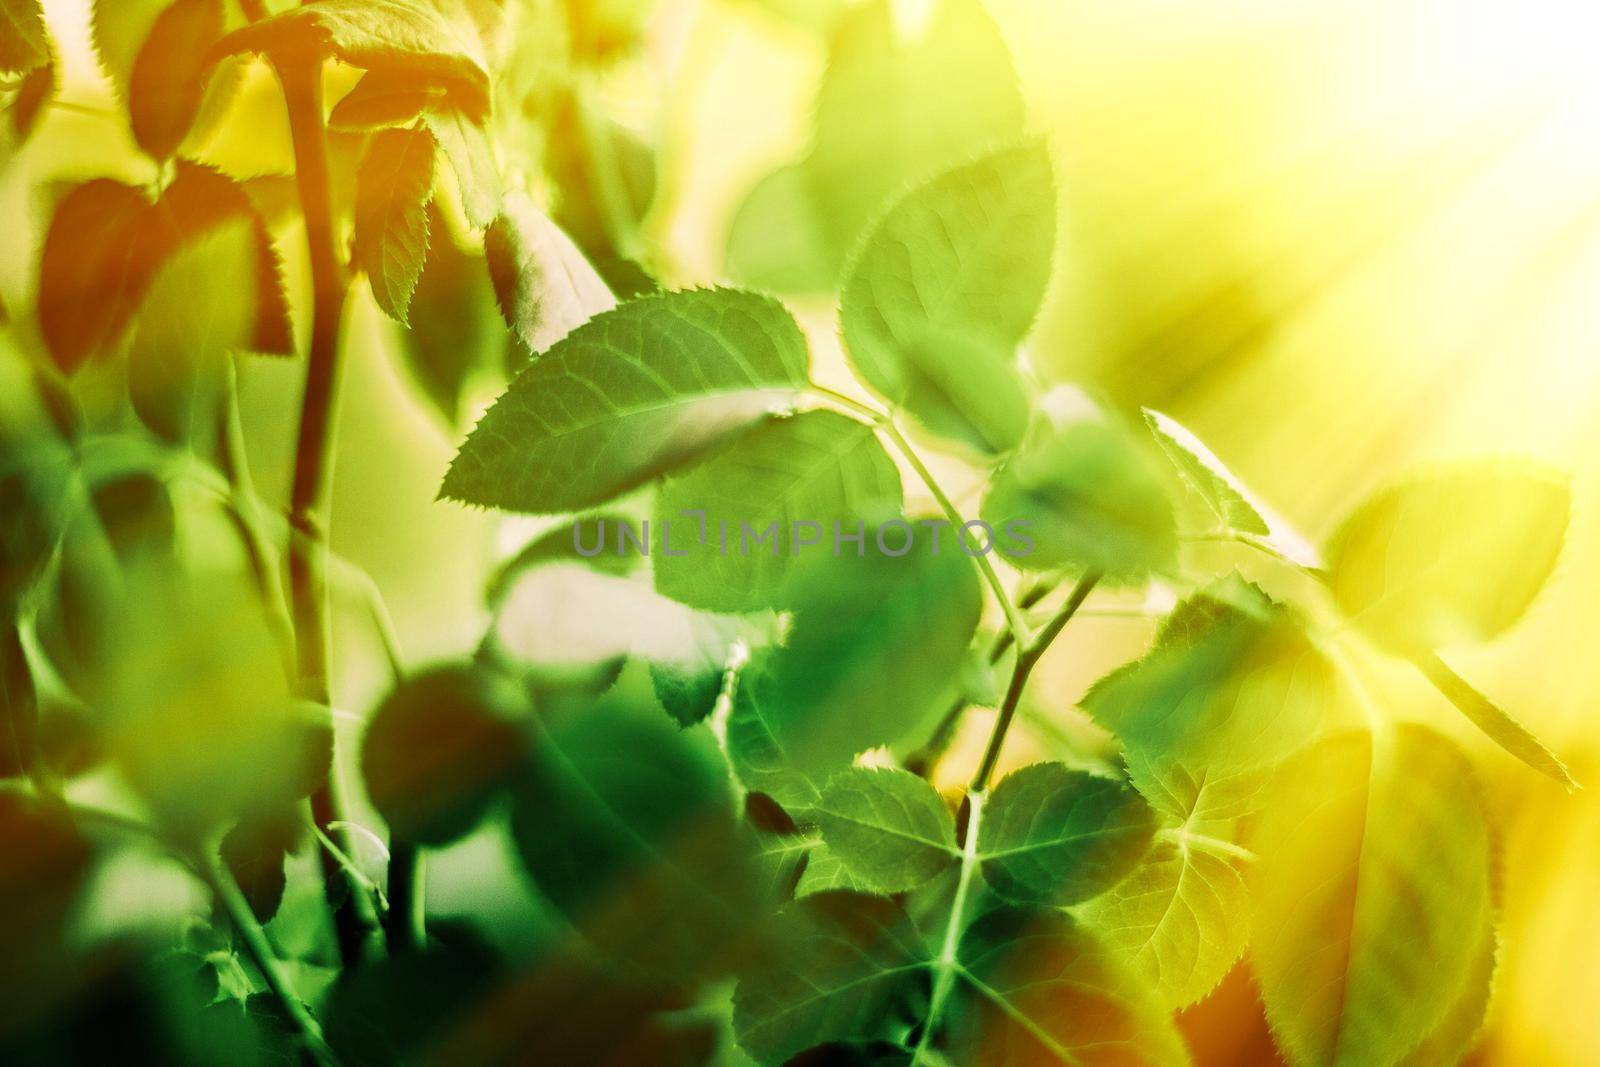 Nature background, sustainable solar energy, environmental concept - Fresh green leaves in spring